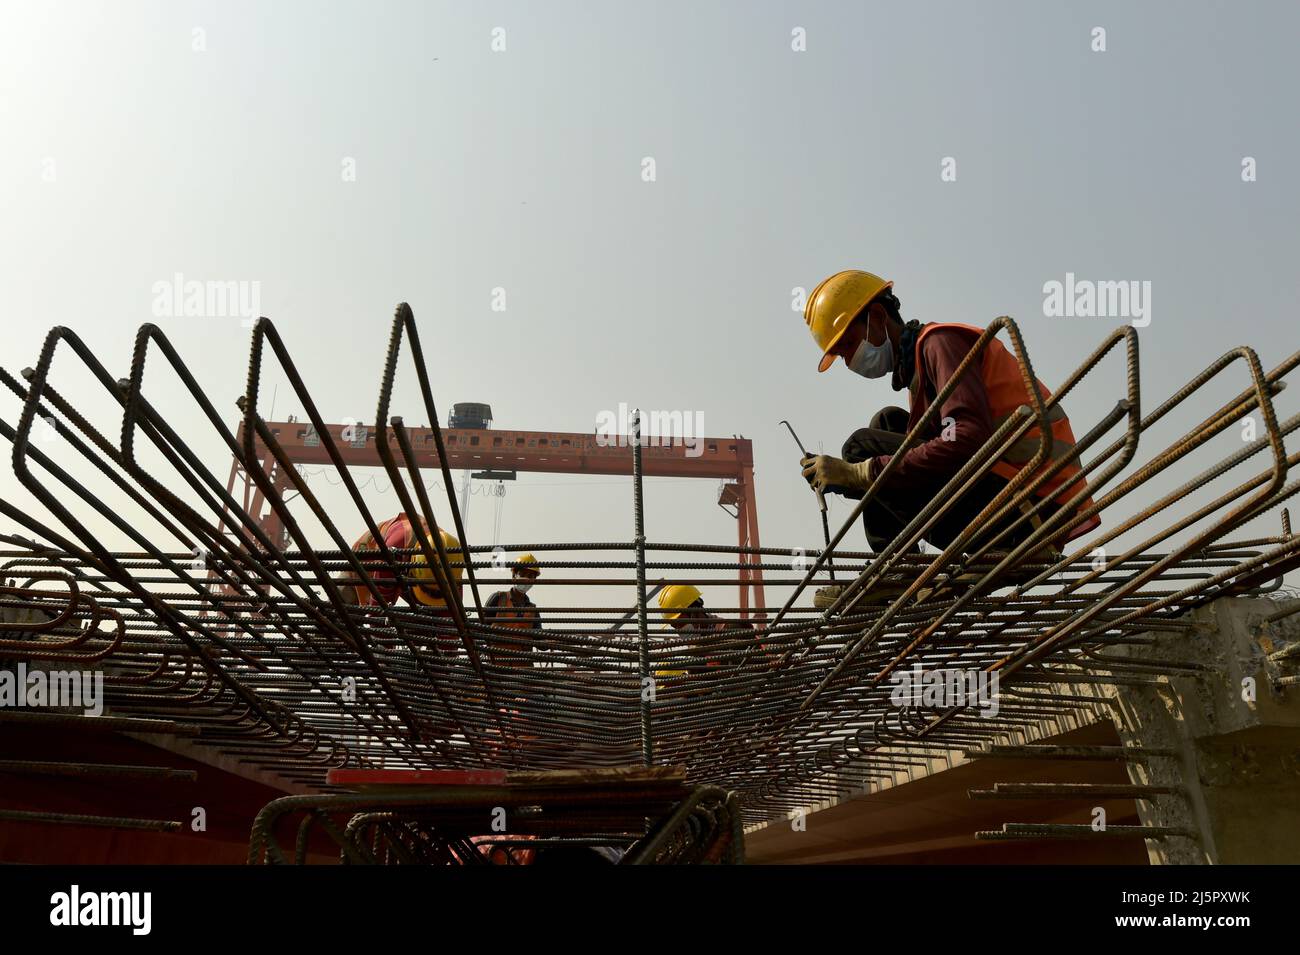 Dhaka. 25th Apr, 2022. Workers tie rebar cages for the First Dhaka Elevated Expressway (FDEE) in Dhaka, Bangladesh, March 17, 2022. TO GO WITH 'Feature: Fast and safe, Sino-Bangladeshi expressway joint venture sees clear road ahead' Credit: Xinhua/Alamy Live News Stock Photo